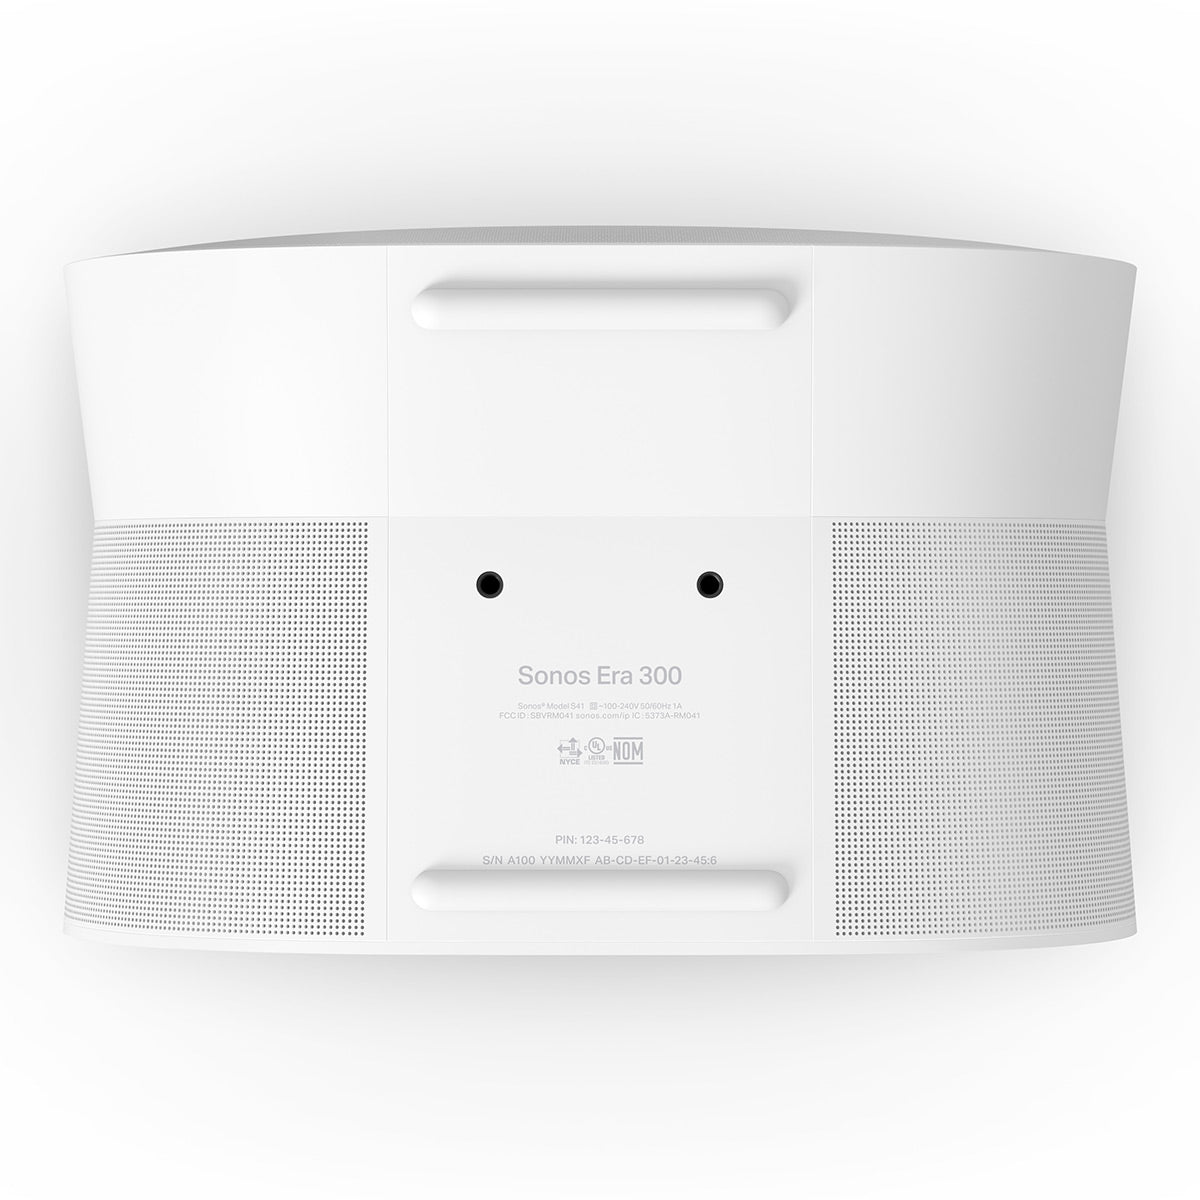 Sonos Era 300 Voice-Controlled Wireless Bluetooth Smart Speaker with Split Combo Cable Adapter with Ethernet and 3.5 mm Jack (White)